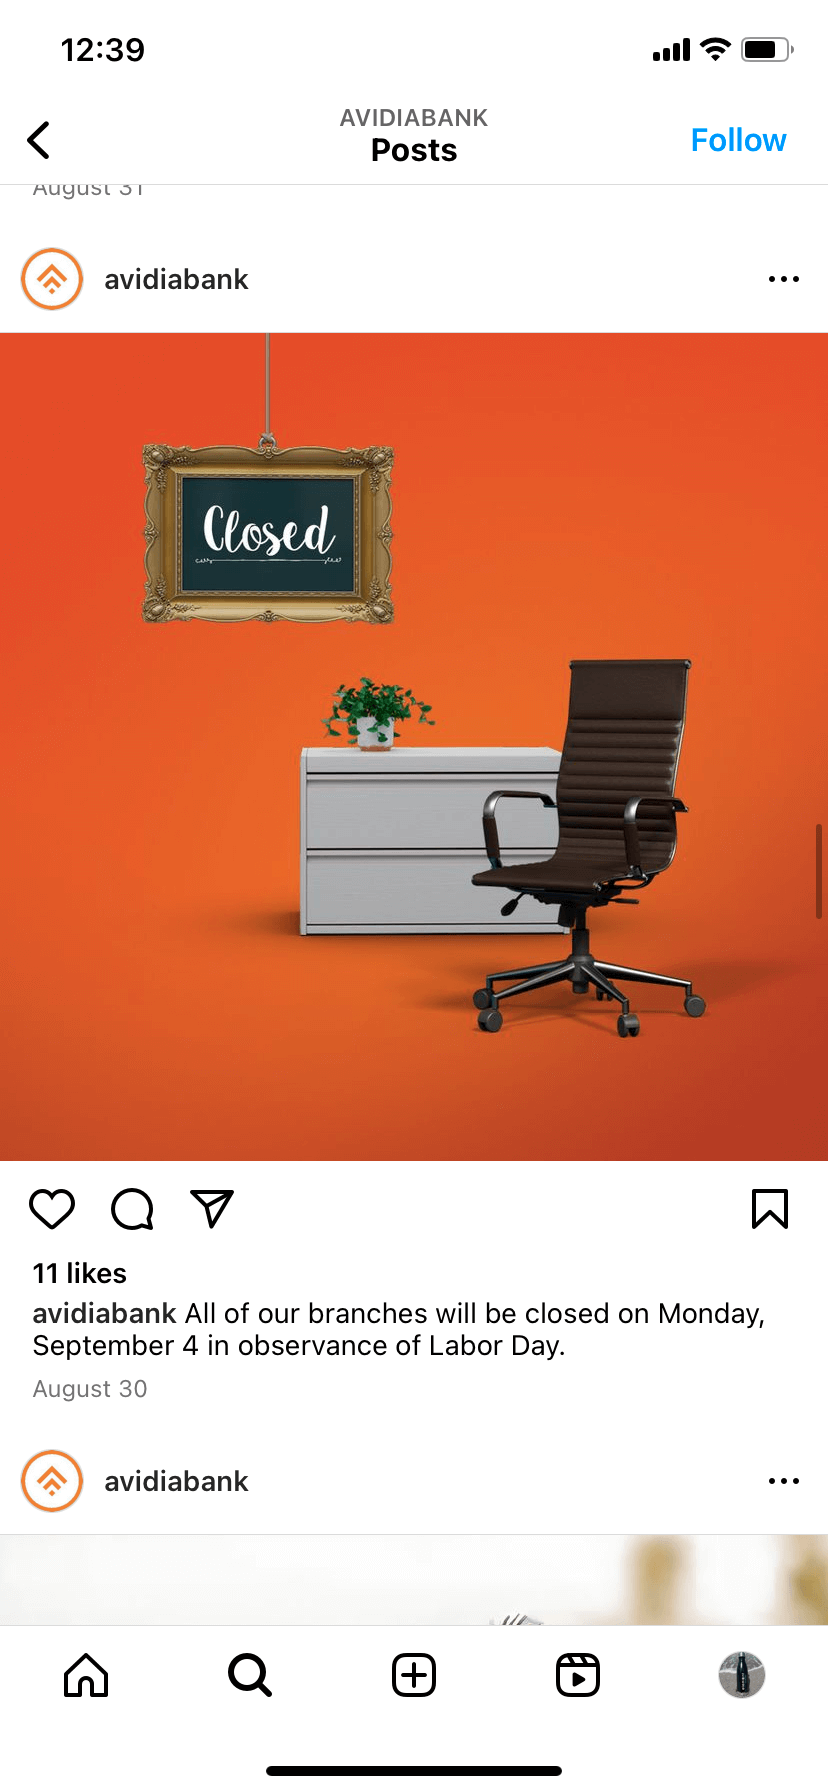 A-creative-'Closed'-sign-hanging-over-an-empty-office-chair-and-desk-set-against-an-orange-backdrop,-posted-by-Avidia-Bank-on-its-bank-social-media-account-for-a-holiday-closure-announcement.